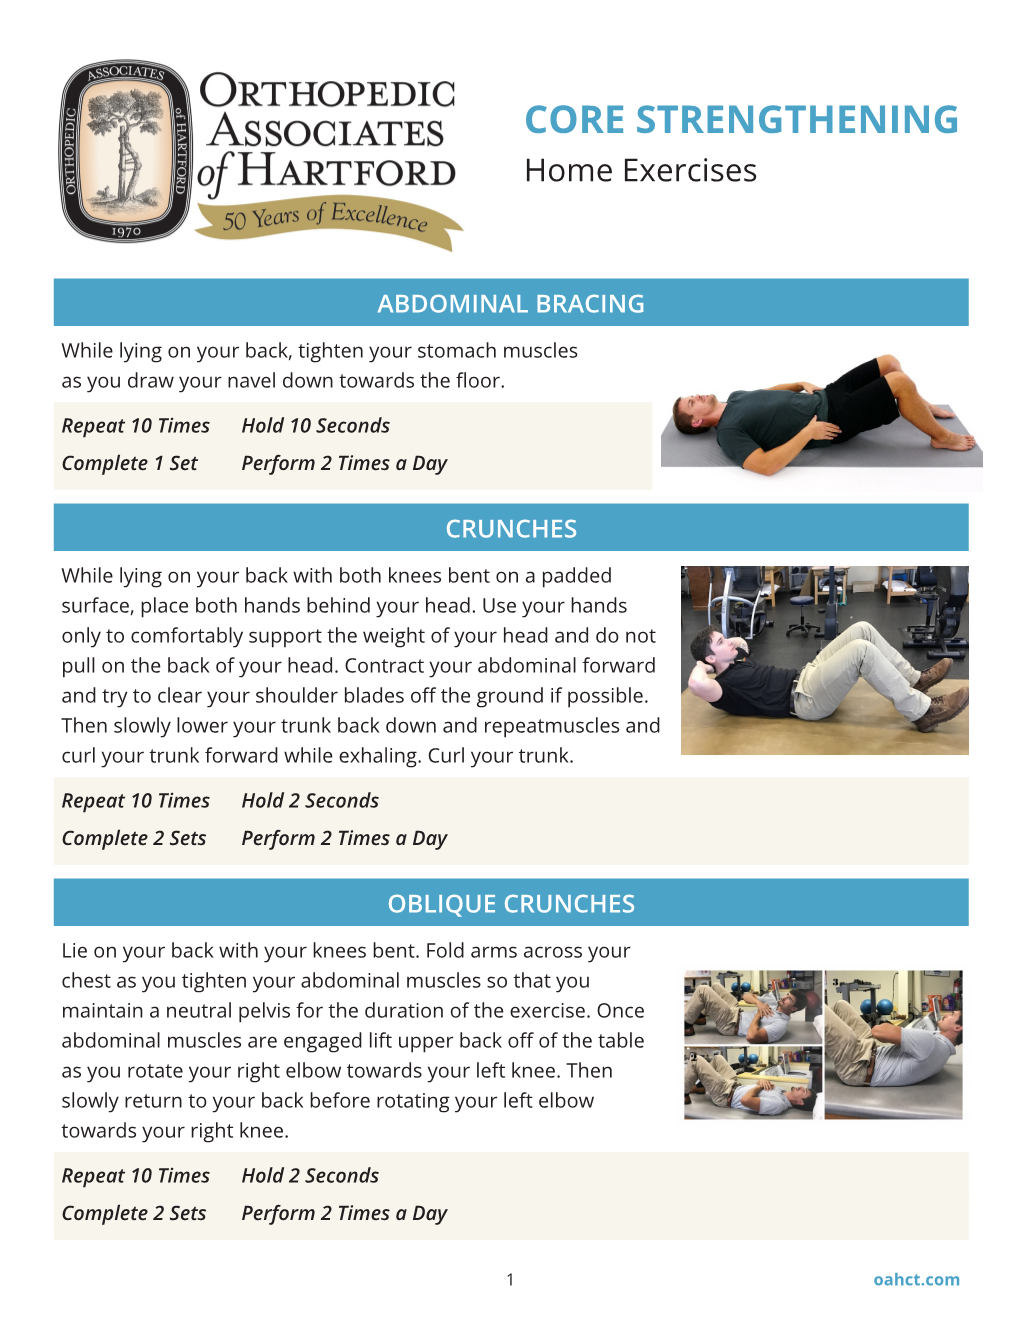 CORE STRENGTHENING Home Exercises